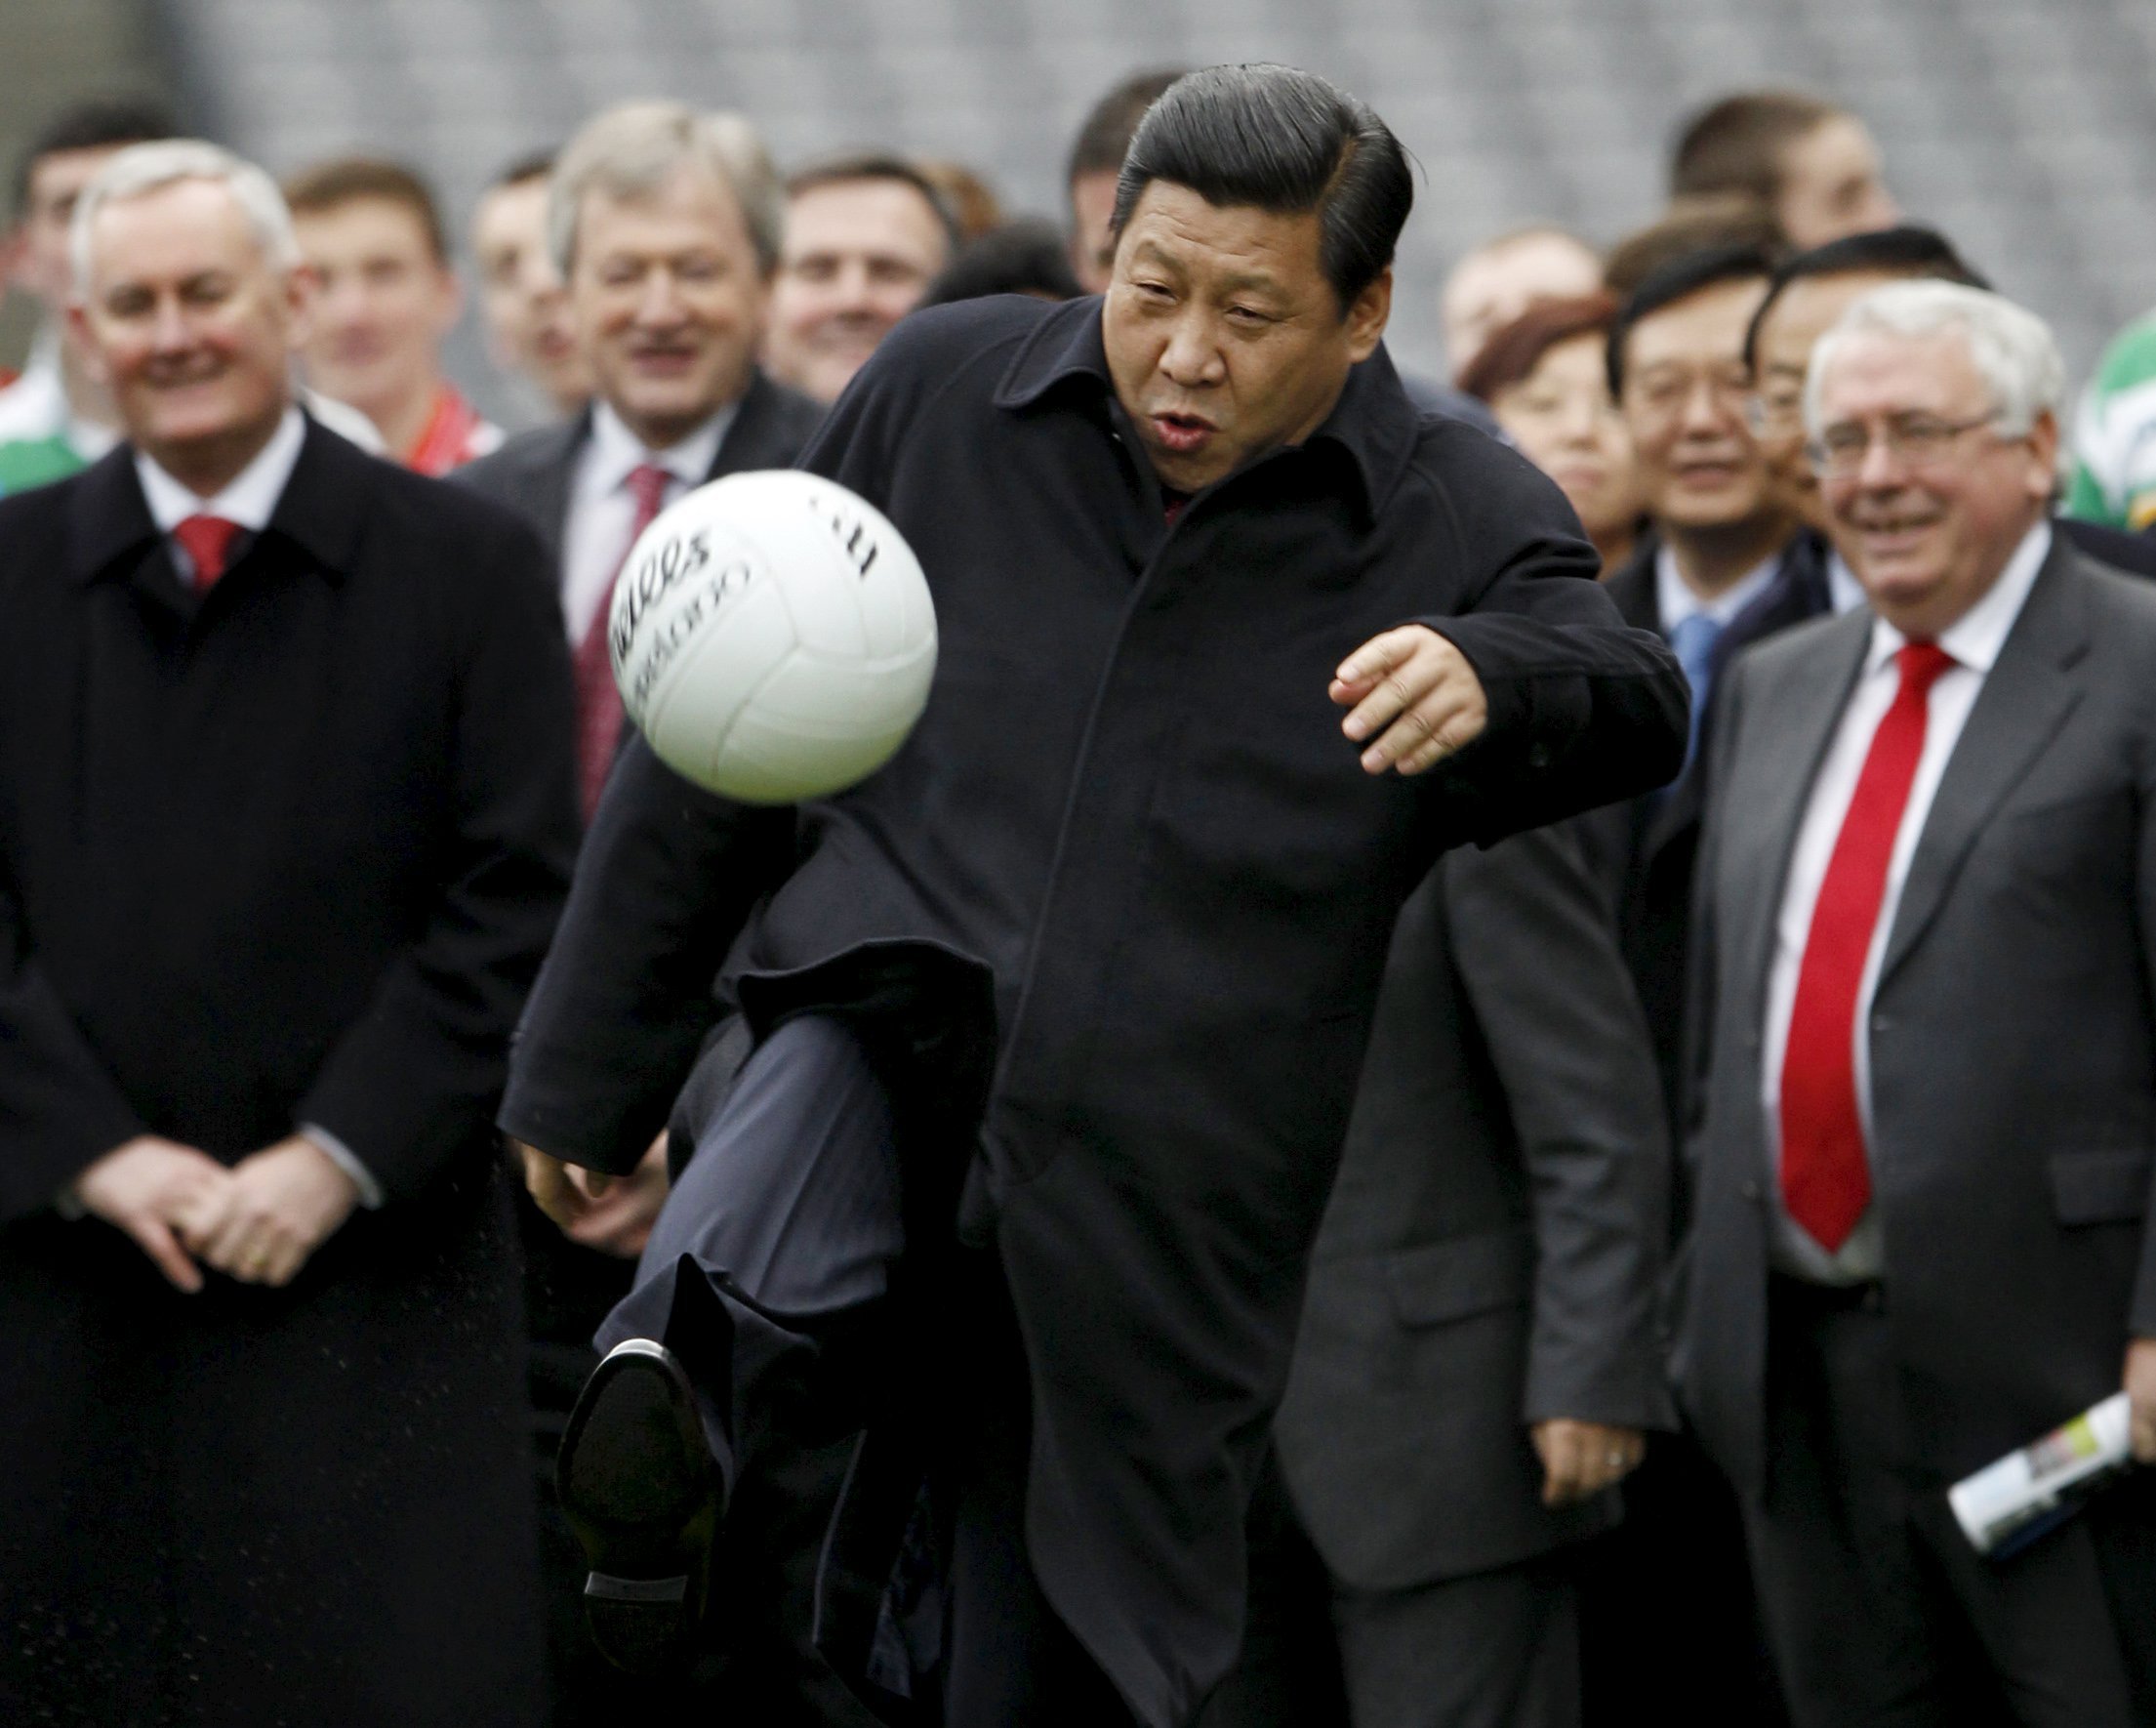 Xi Jinping kicks a football during a visit to Croke Park in Dublin, Ireland, while China's vice-president in 2012. Photo: Reuters